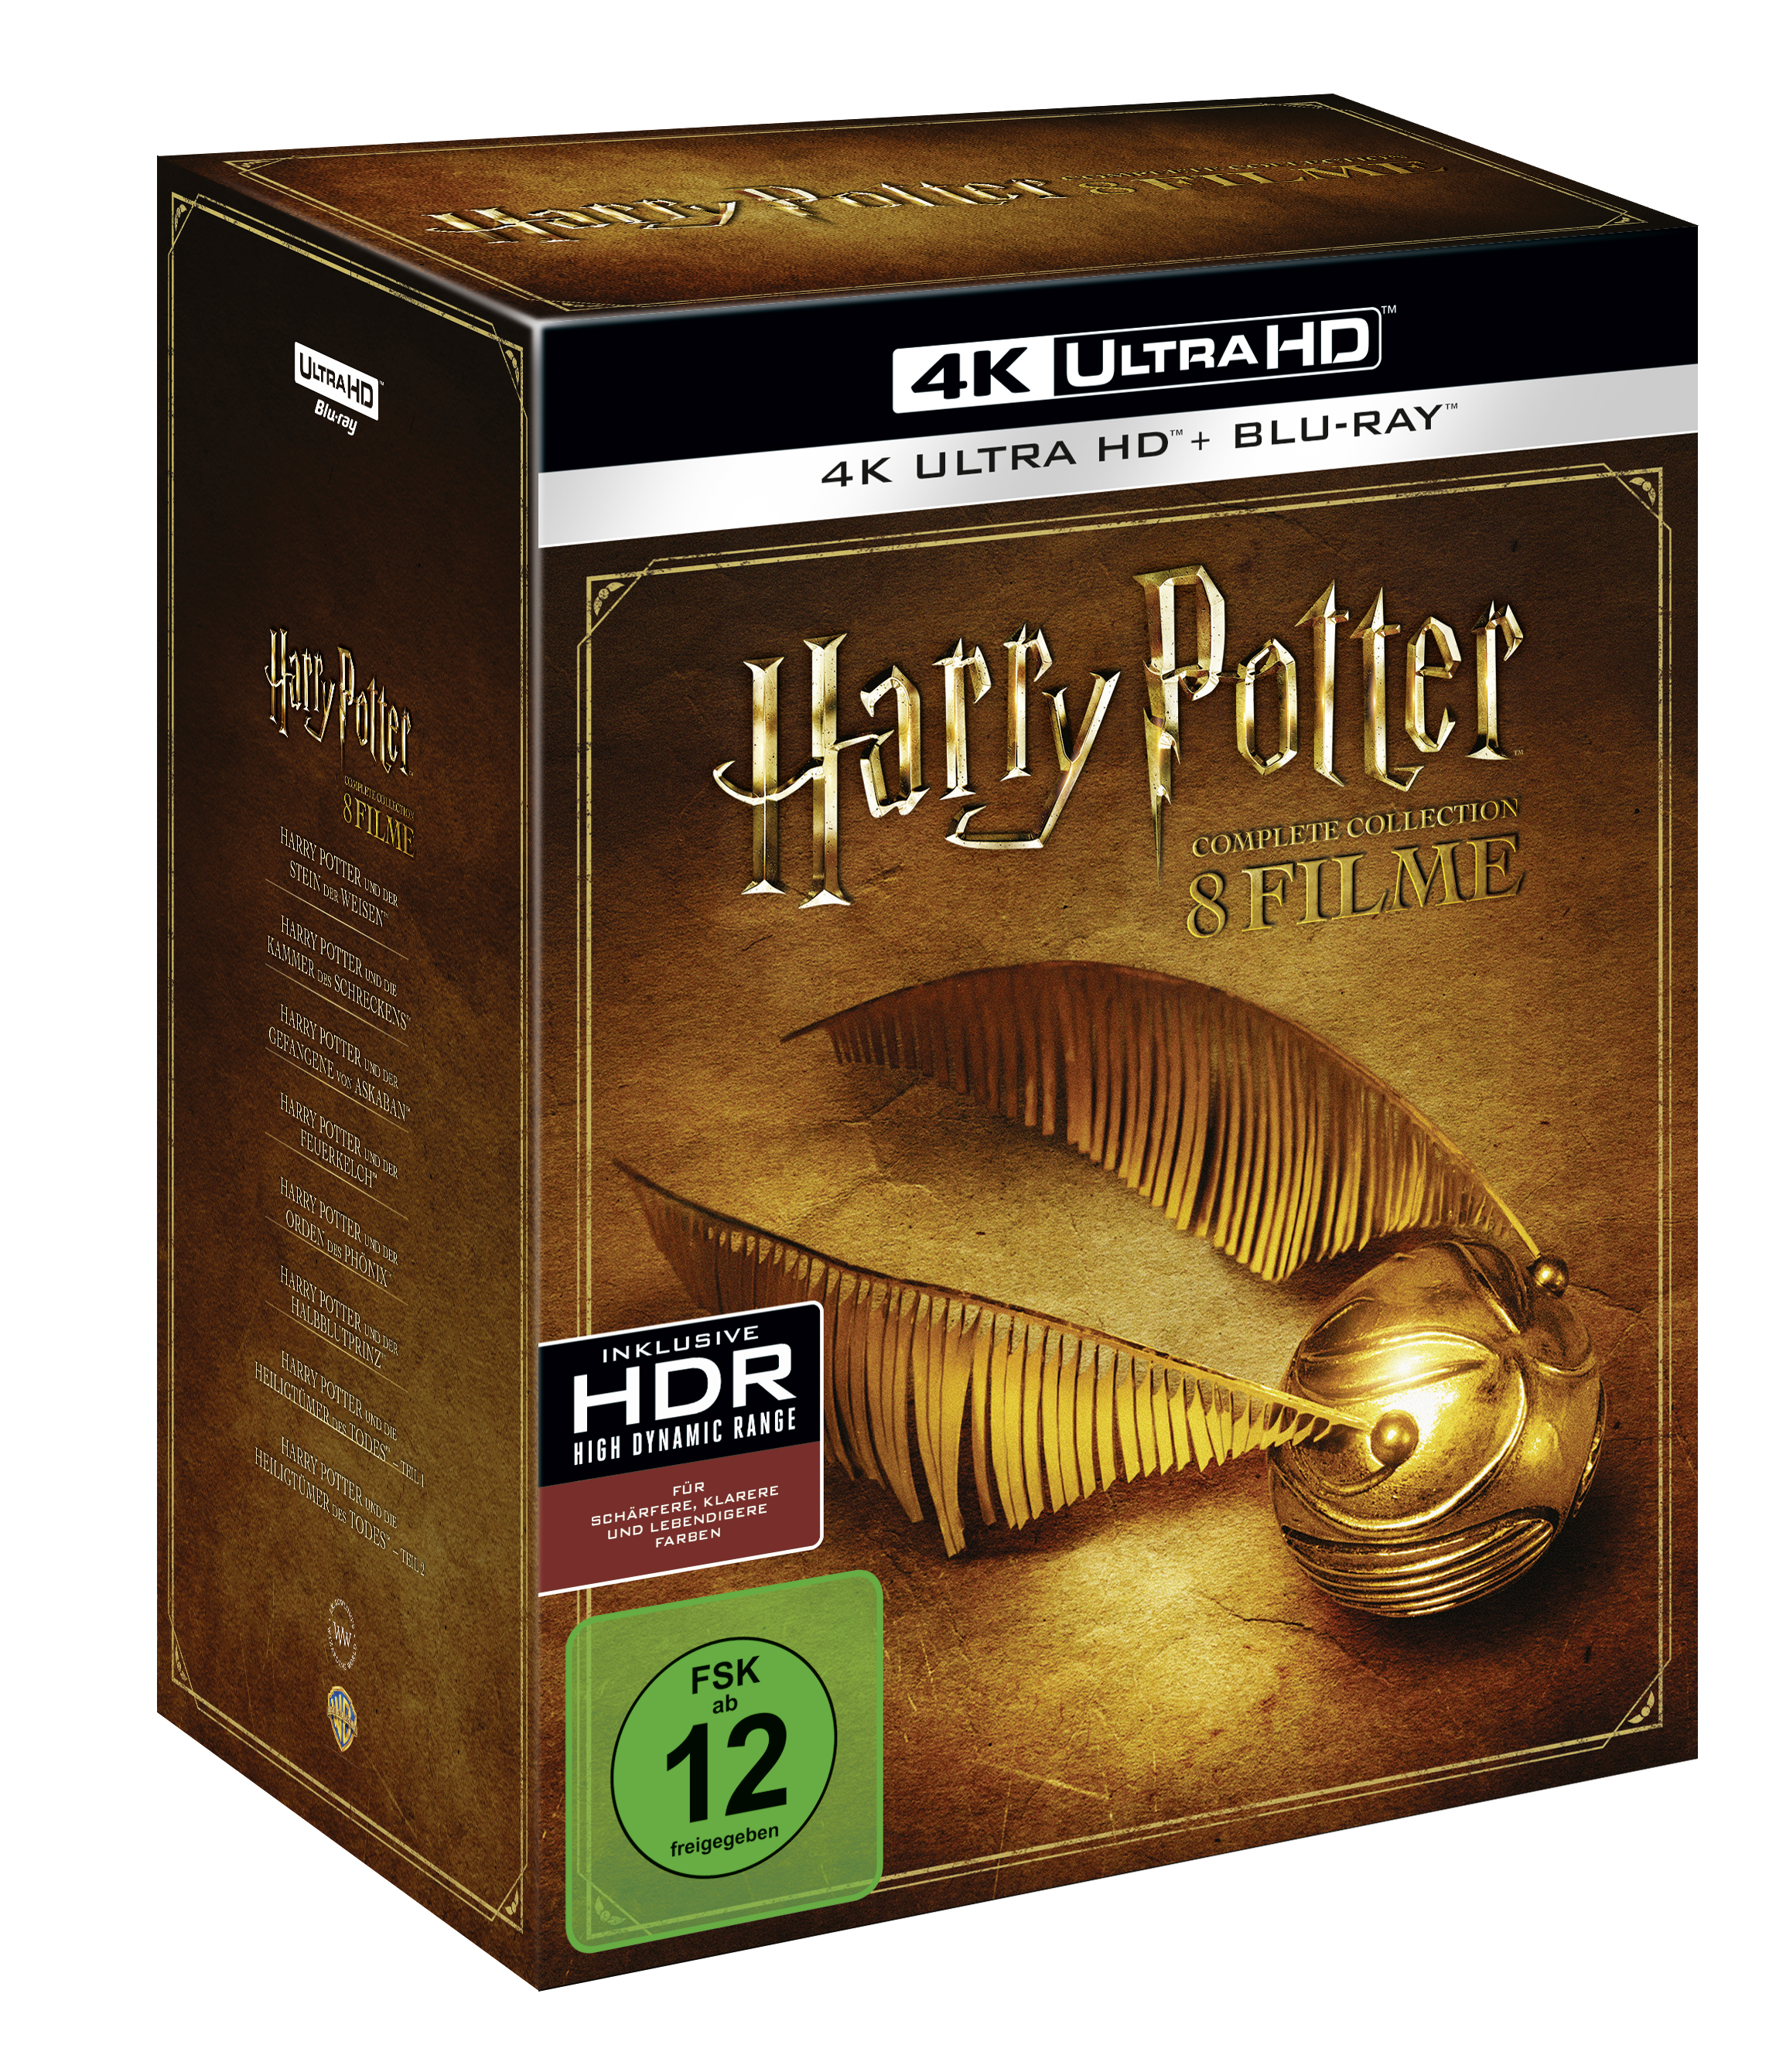 4K Harry Collection HD Blu-ray Potter 4K Ultra (16-Discs) Complete